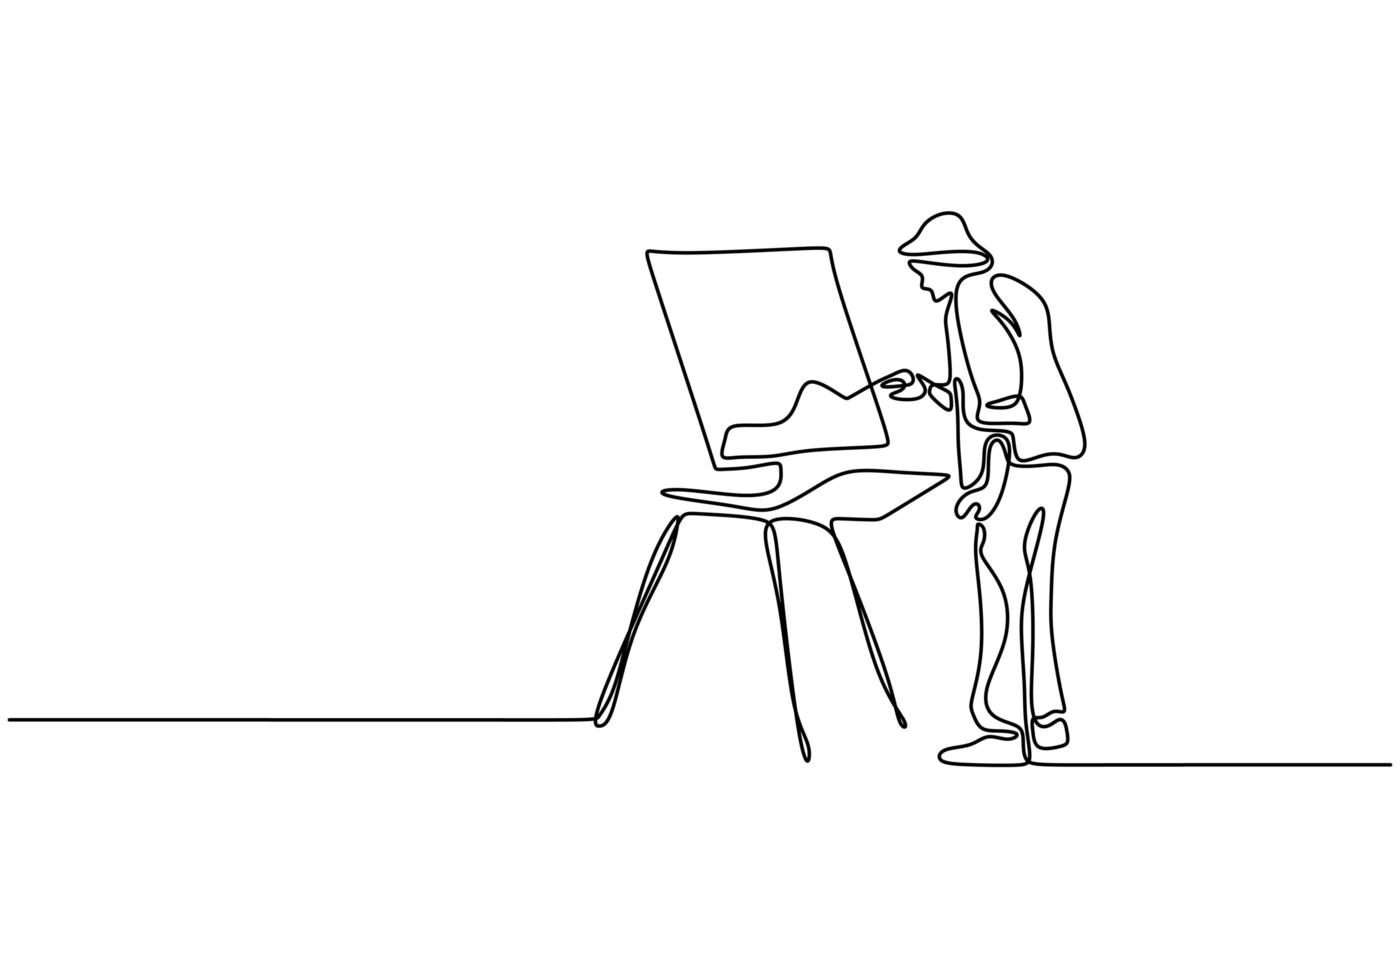 One line drawing of painter artist. A man standing painting an artwork on canvas. Continuous hand drawn minimalism. vector